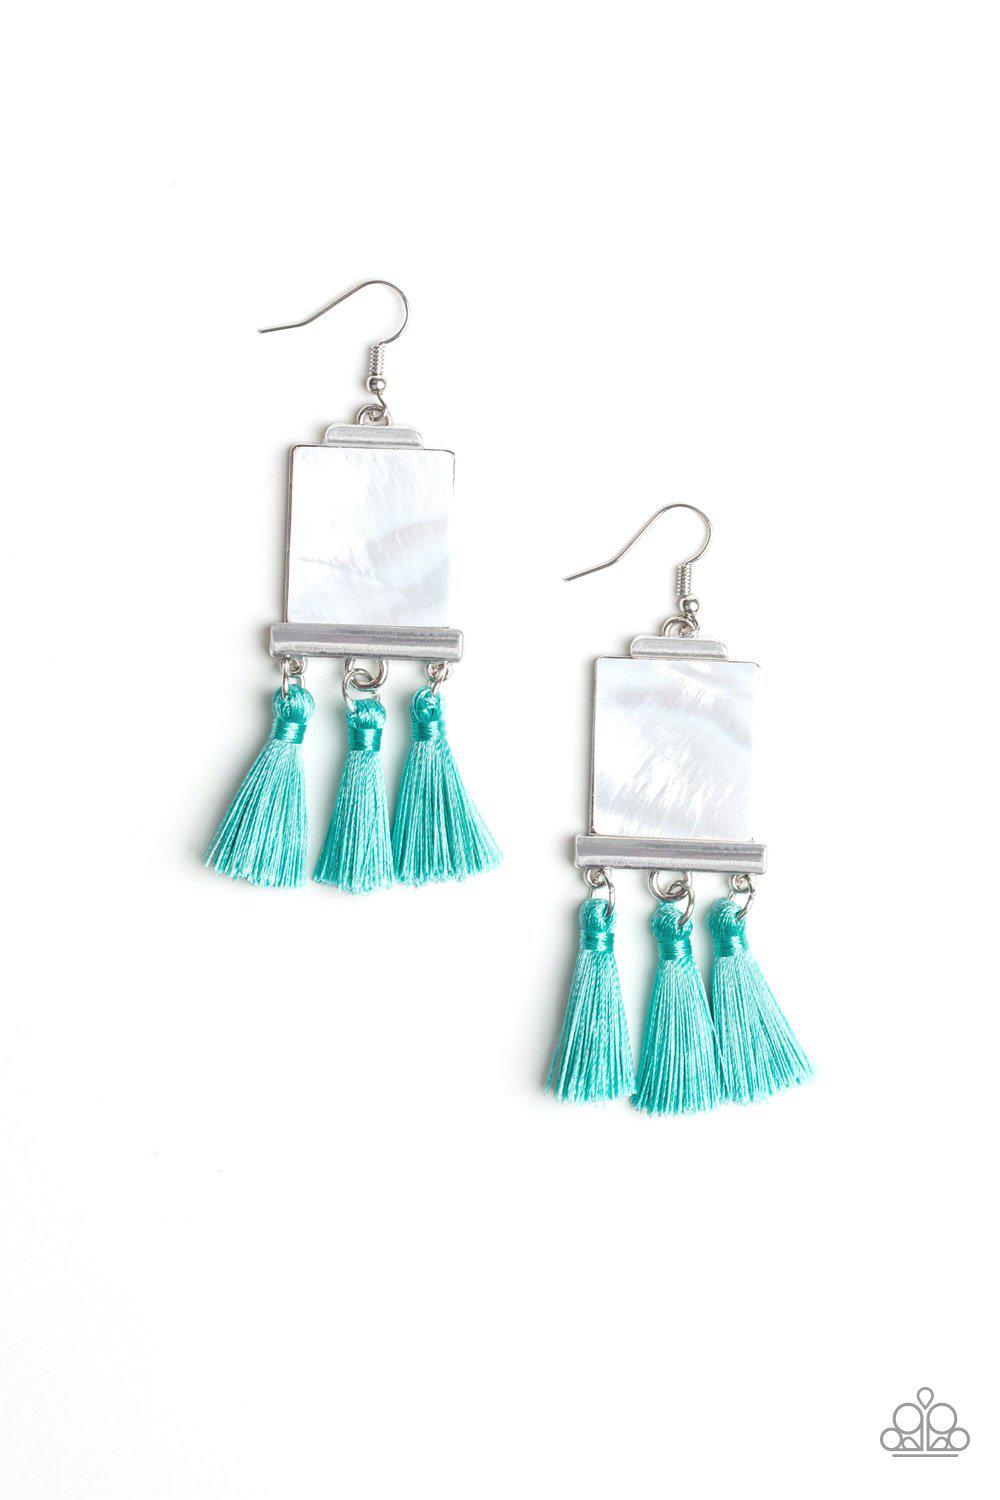 Tassel Retreat White Acrylic and Blue Tassel Earrings - Paparazzi Accessories-CarasShop.com - $5 Jewelry by Cara Jewels